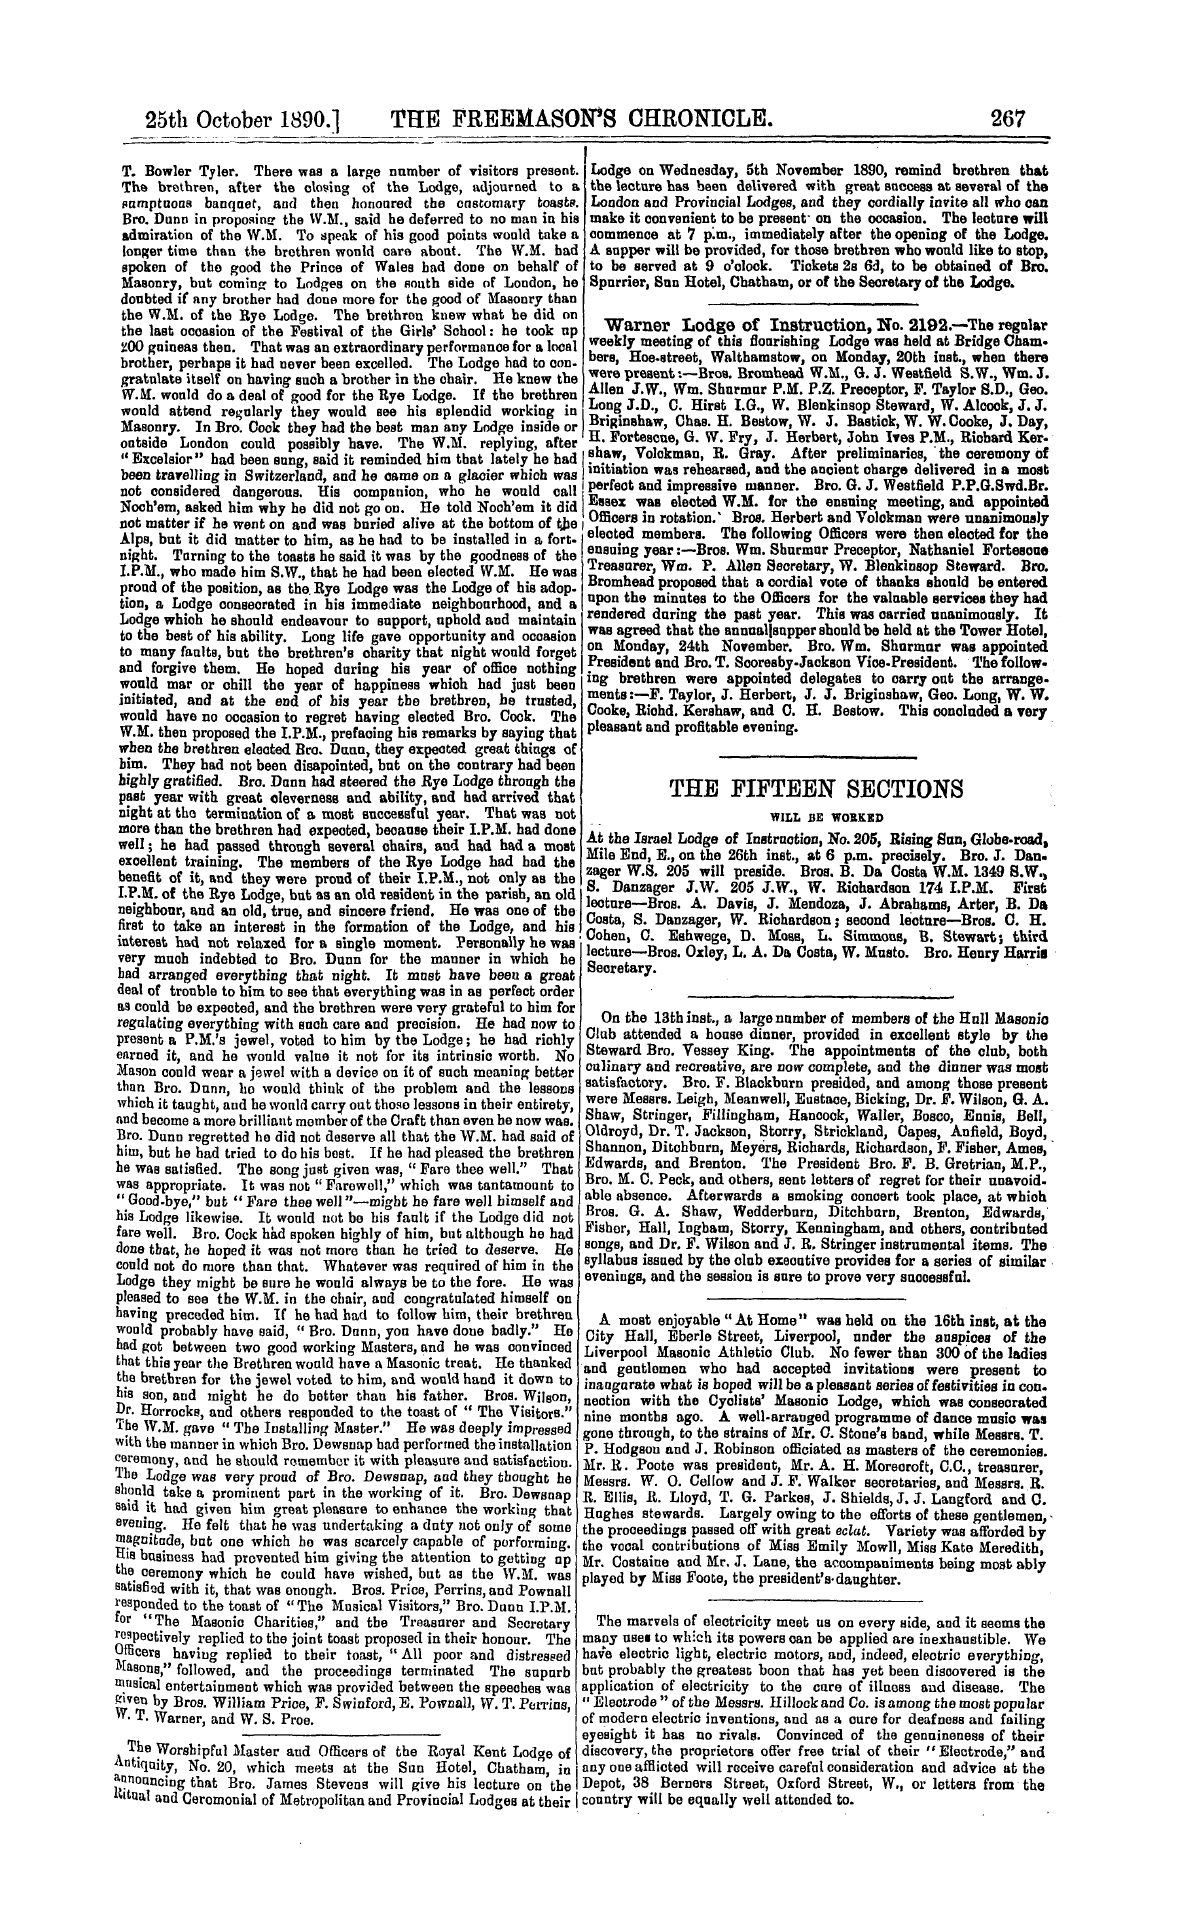 The Freemason's Chronicle: 1890-10-25 - The Fifteen Sections